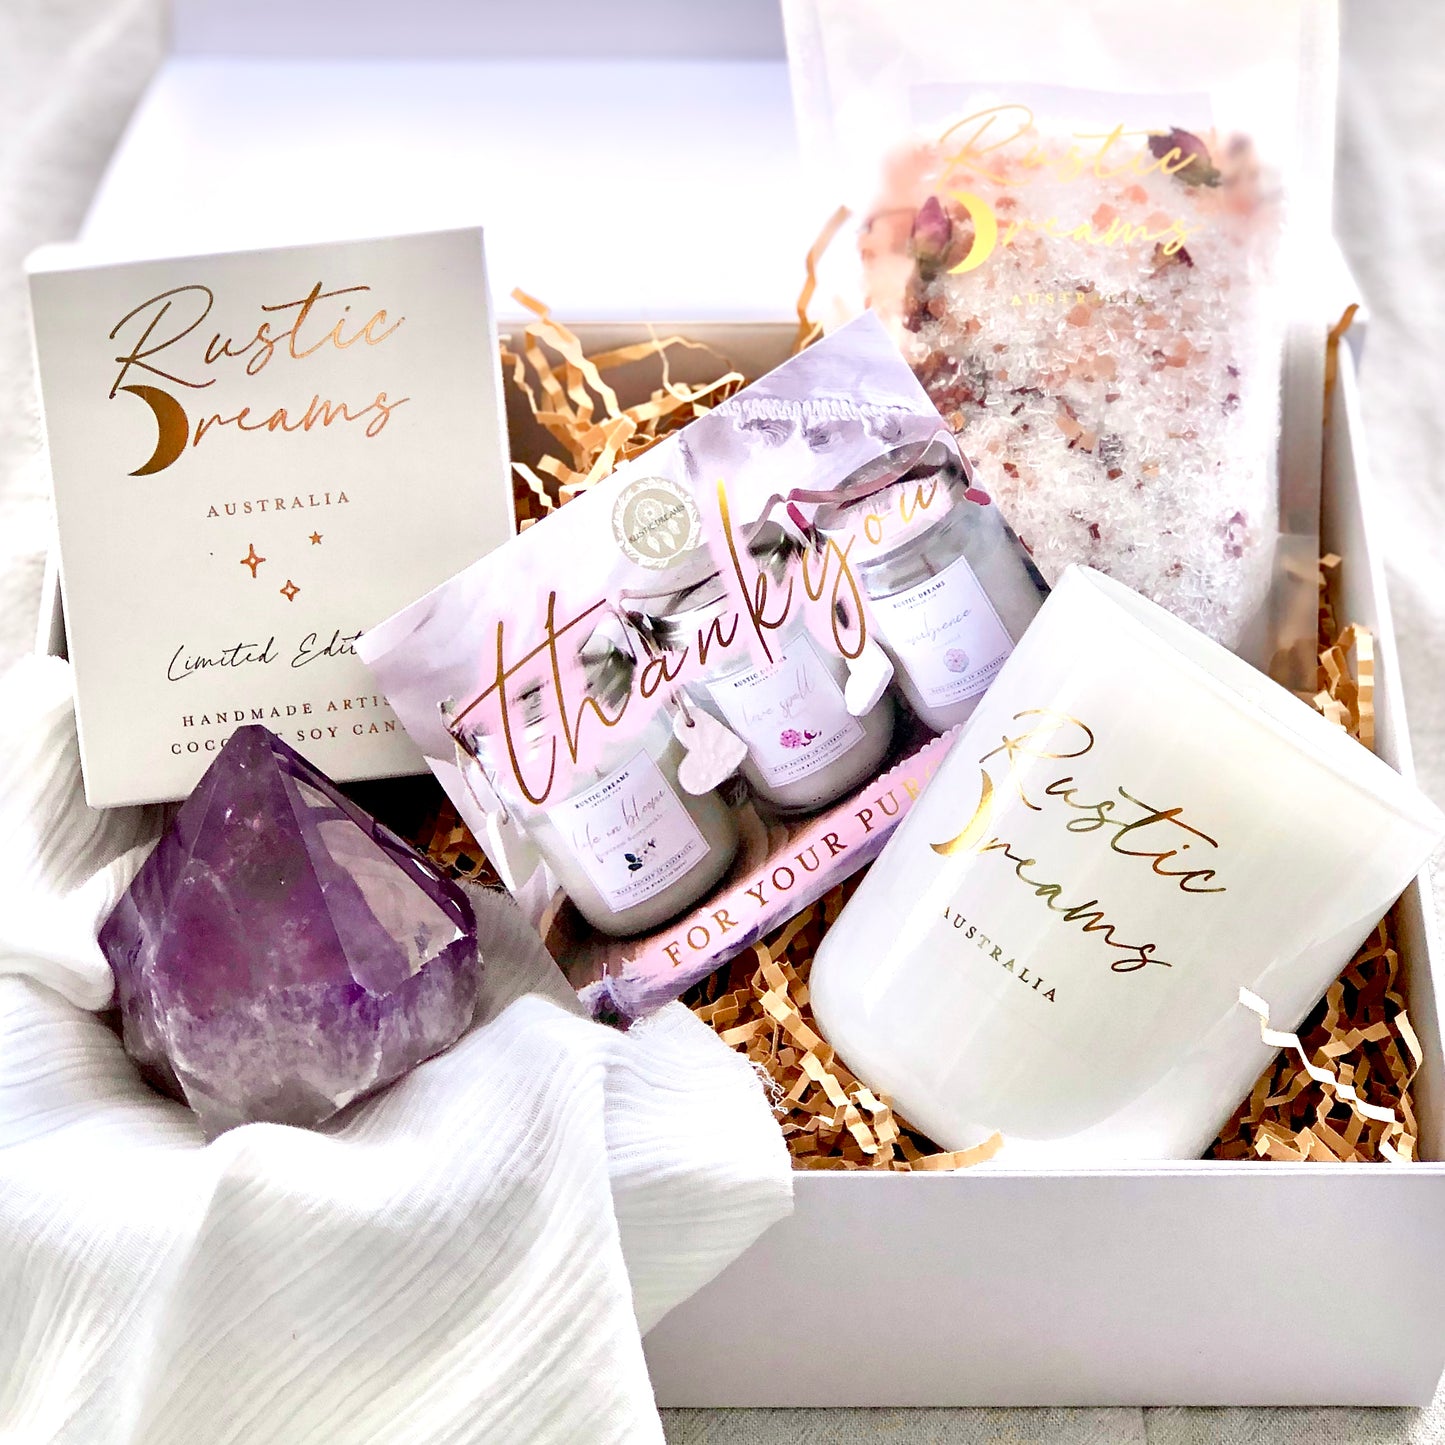 Amethyst Gift Box - Rustic Dreams - Scented Soy Candle